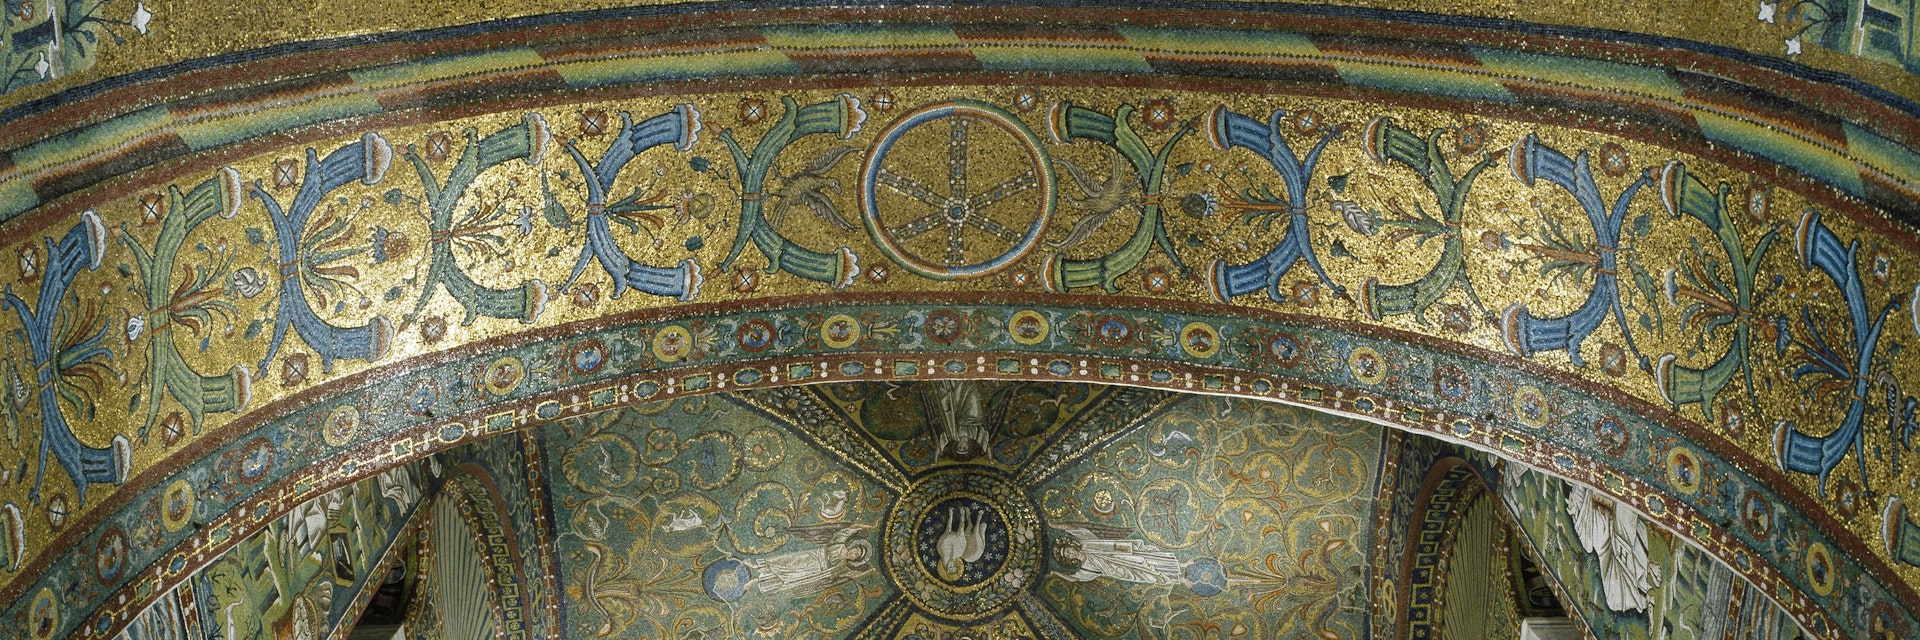 ITALY - JULY 24: Mosaics in the apse vault, 538-545, Basilica of San Vitale (UNESCO World Heritage List, 1996), founded 526, Ravenna, Emilia-Romagna, Italy. (Photo by DeAgostini/Getty Images)